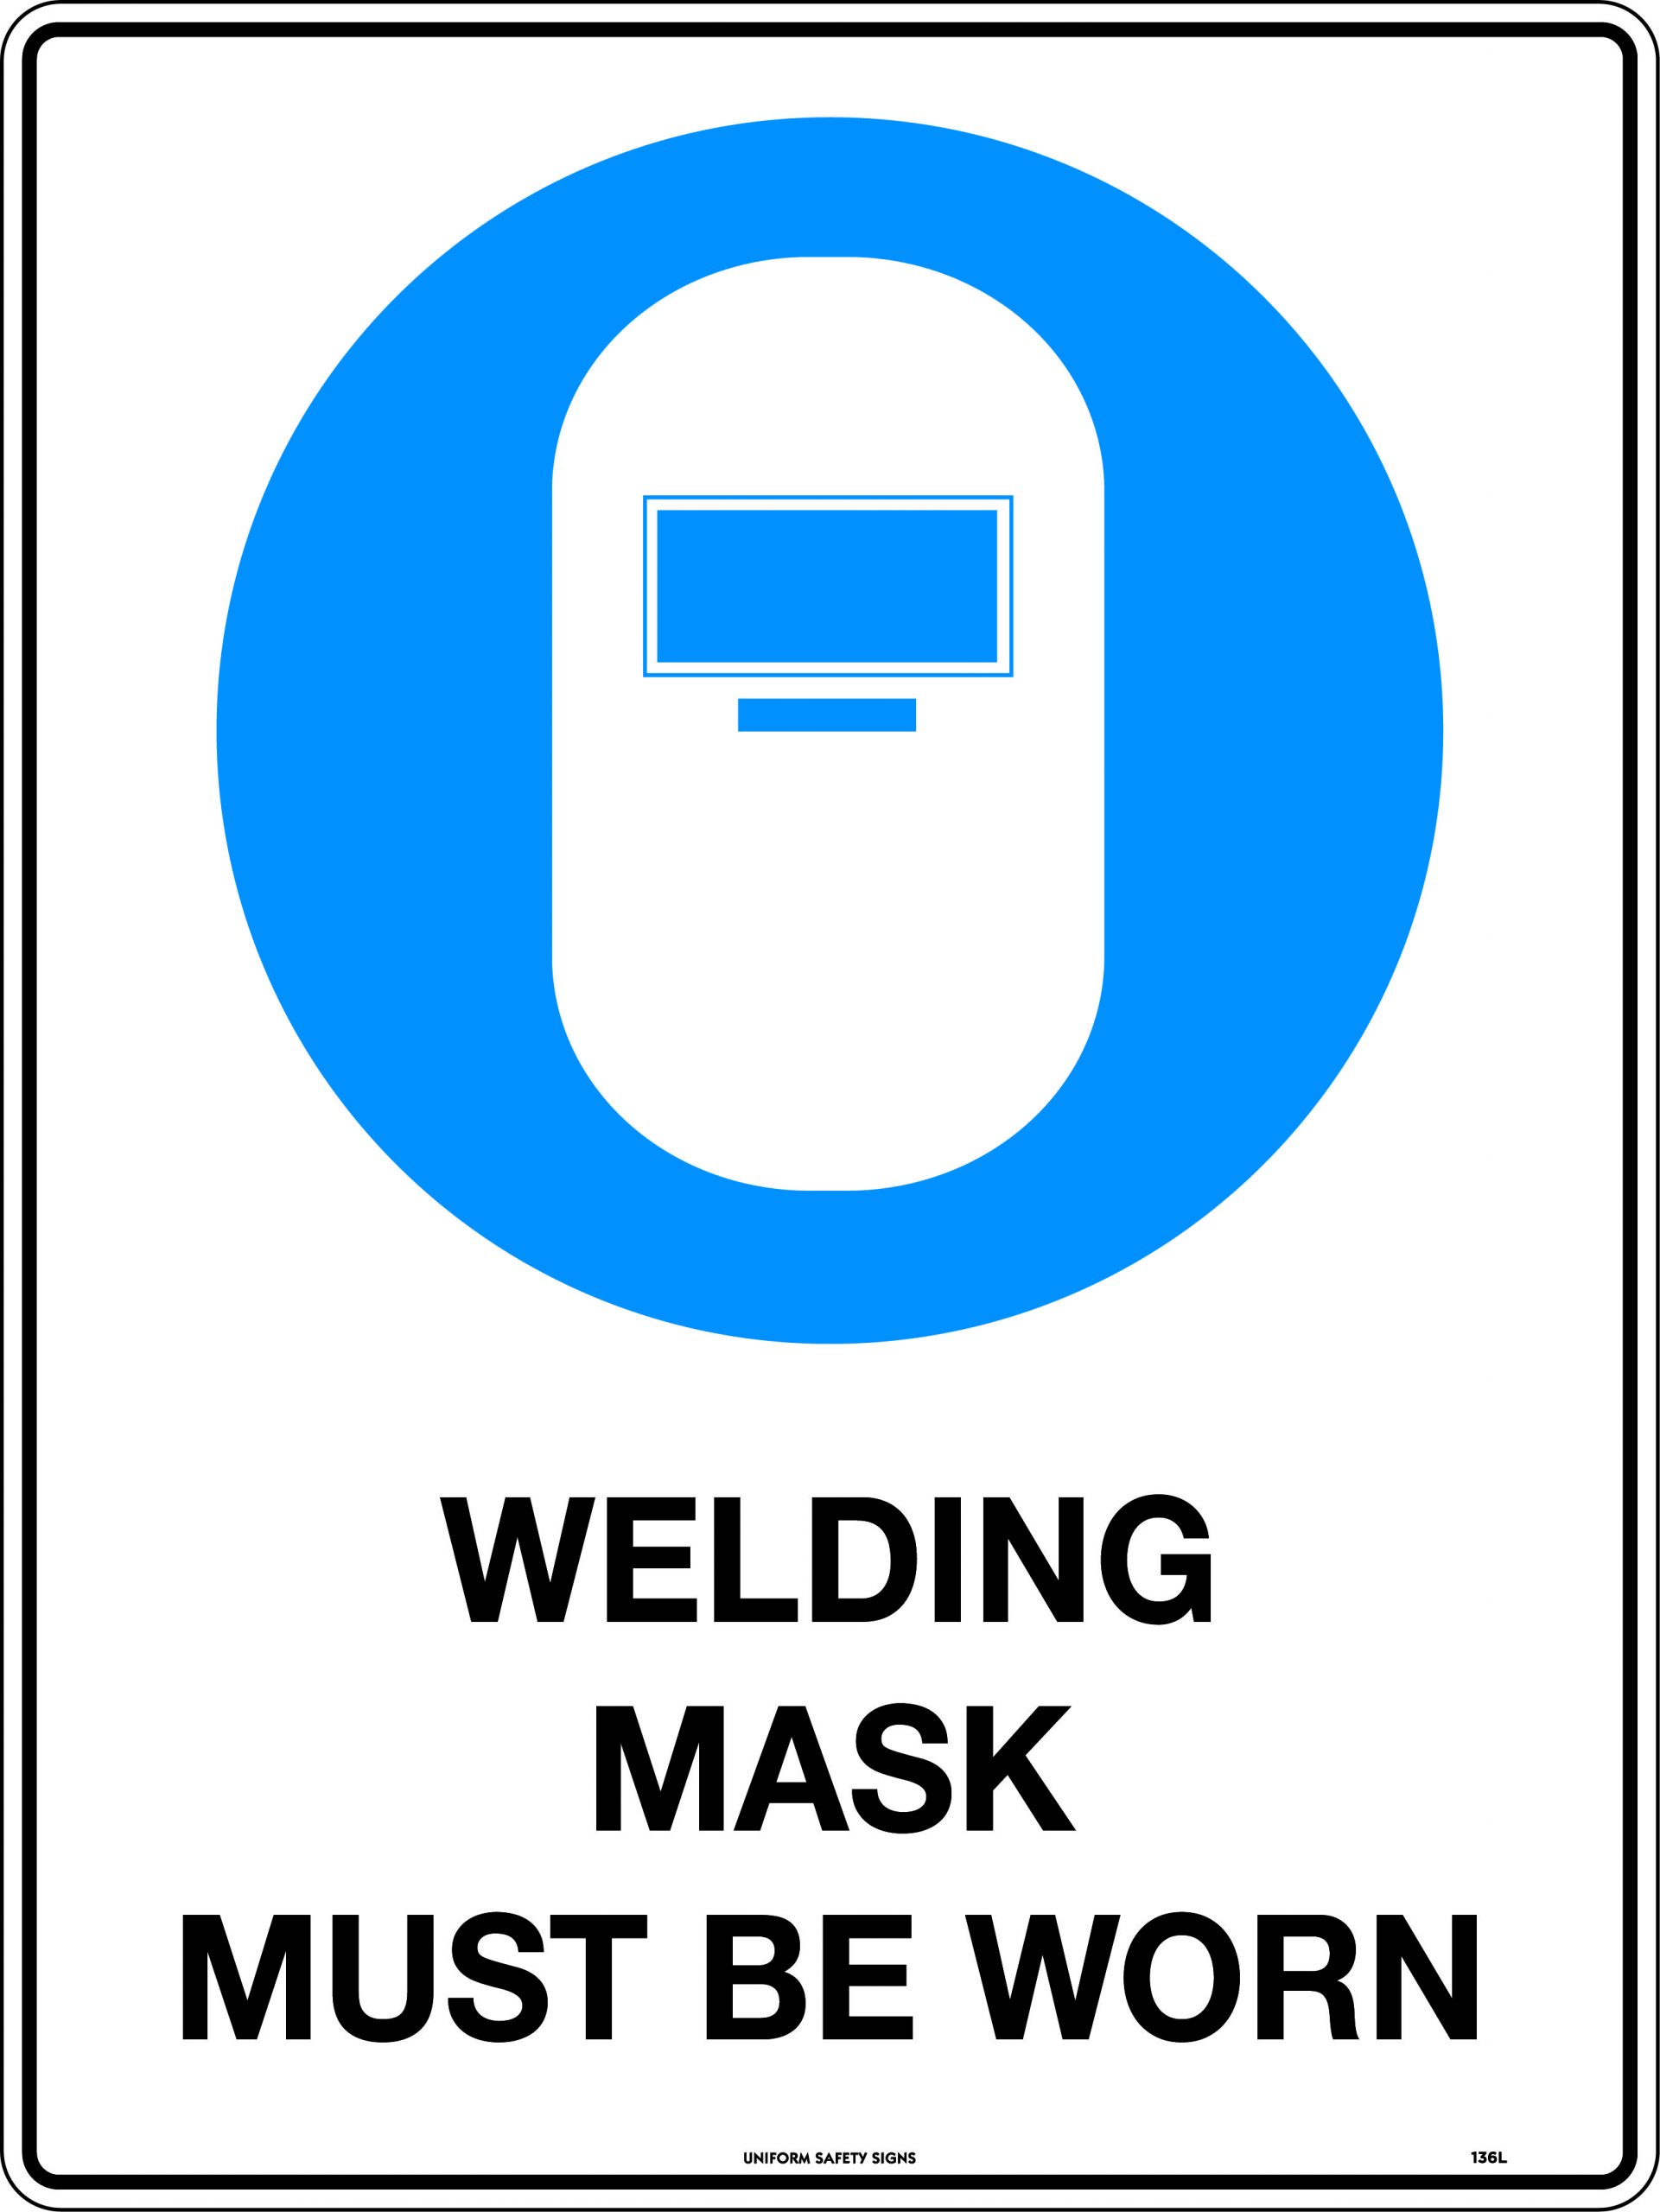 UNIFORM SAFETY 600X450MM POLY WELDING MASK MUST BE WORN 